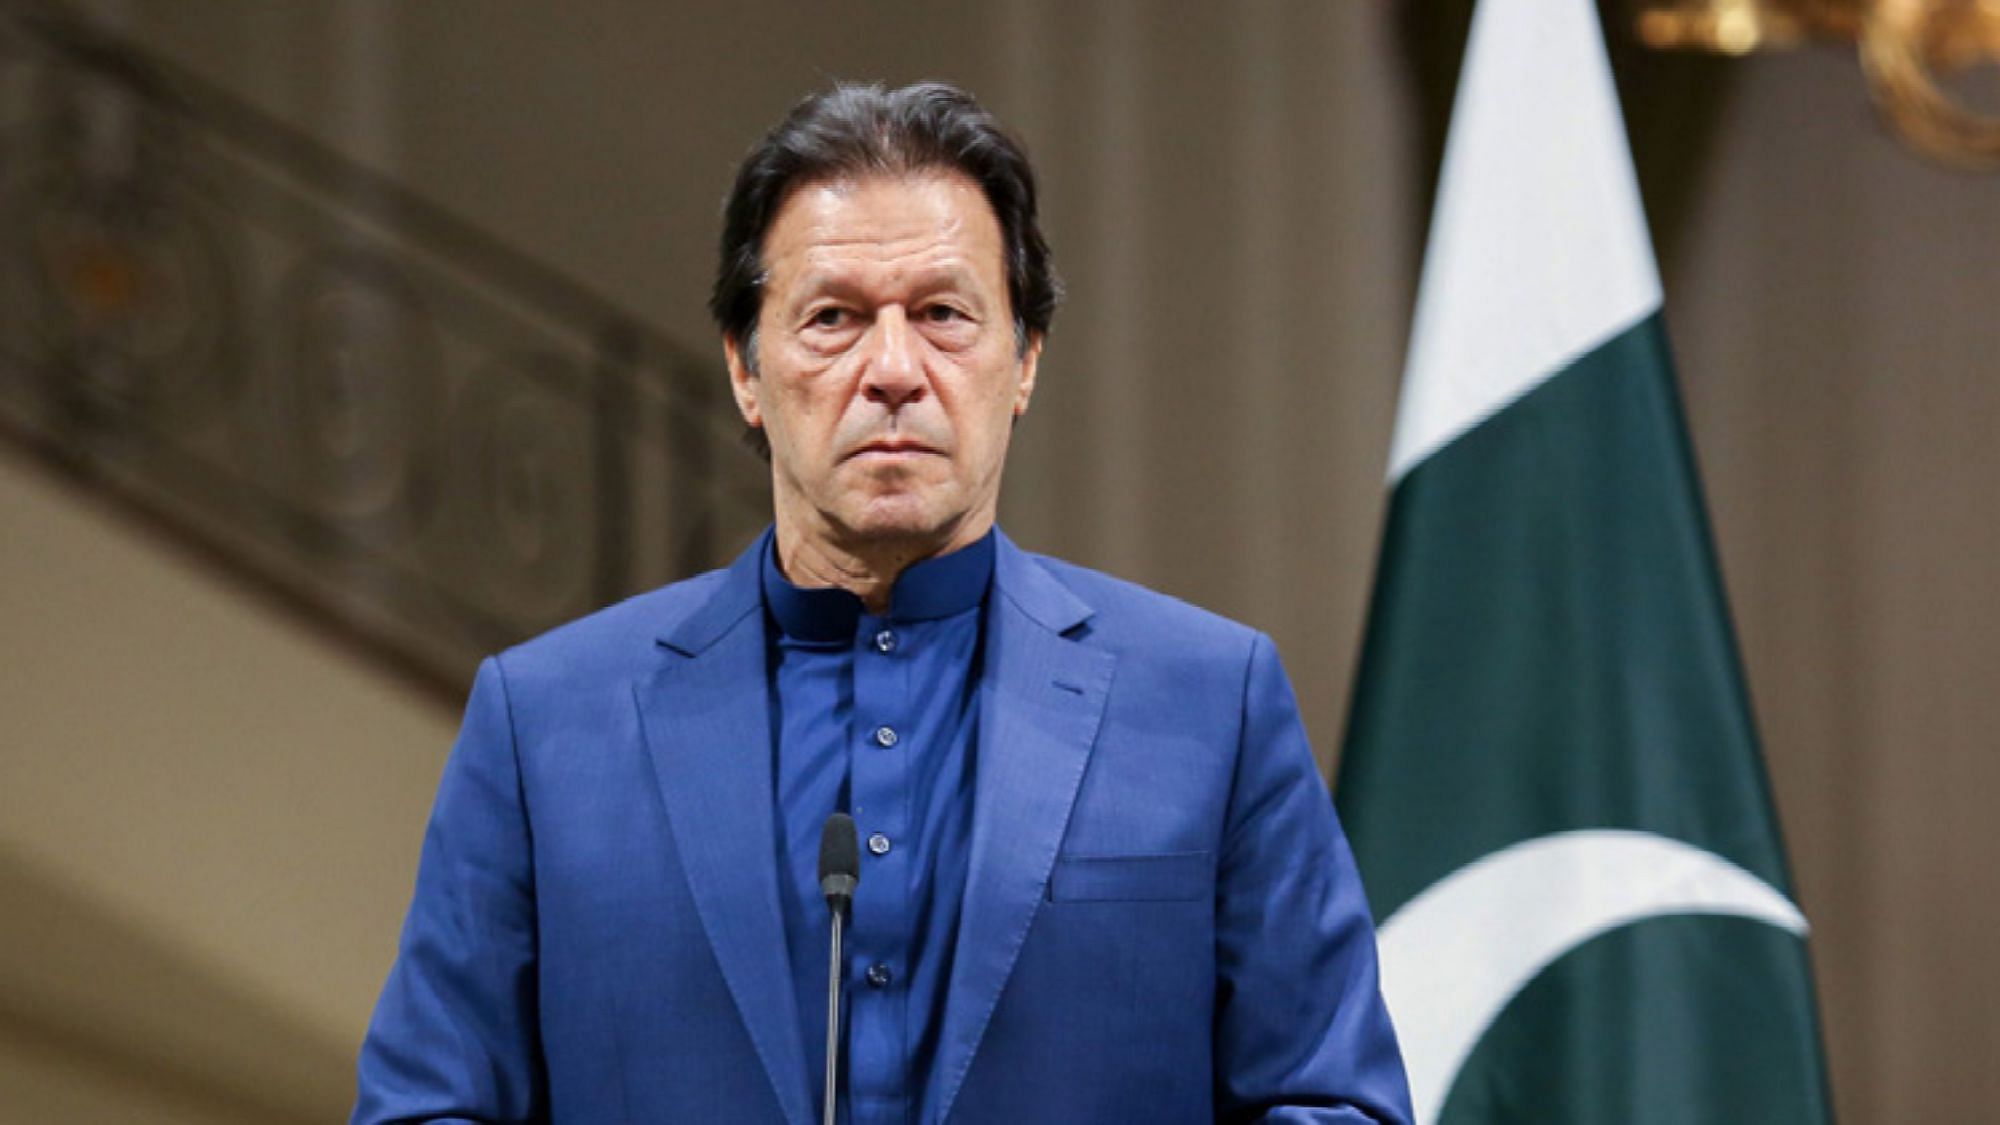 <div class="paragraphs"><p>Pakistan's Prime Minster, Imran Khan, has received backlash after his views on women's safety and sexual assault.</p></div>